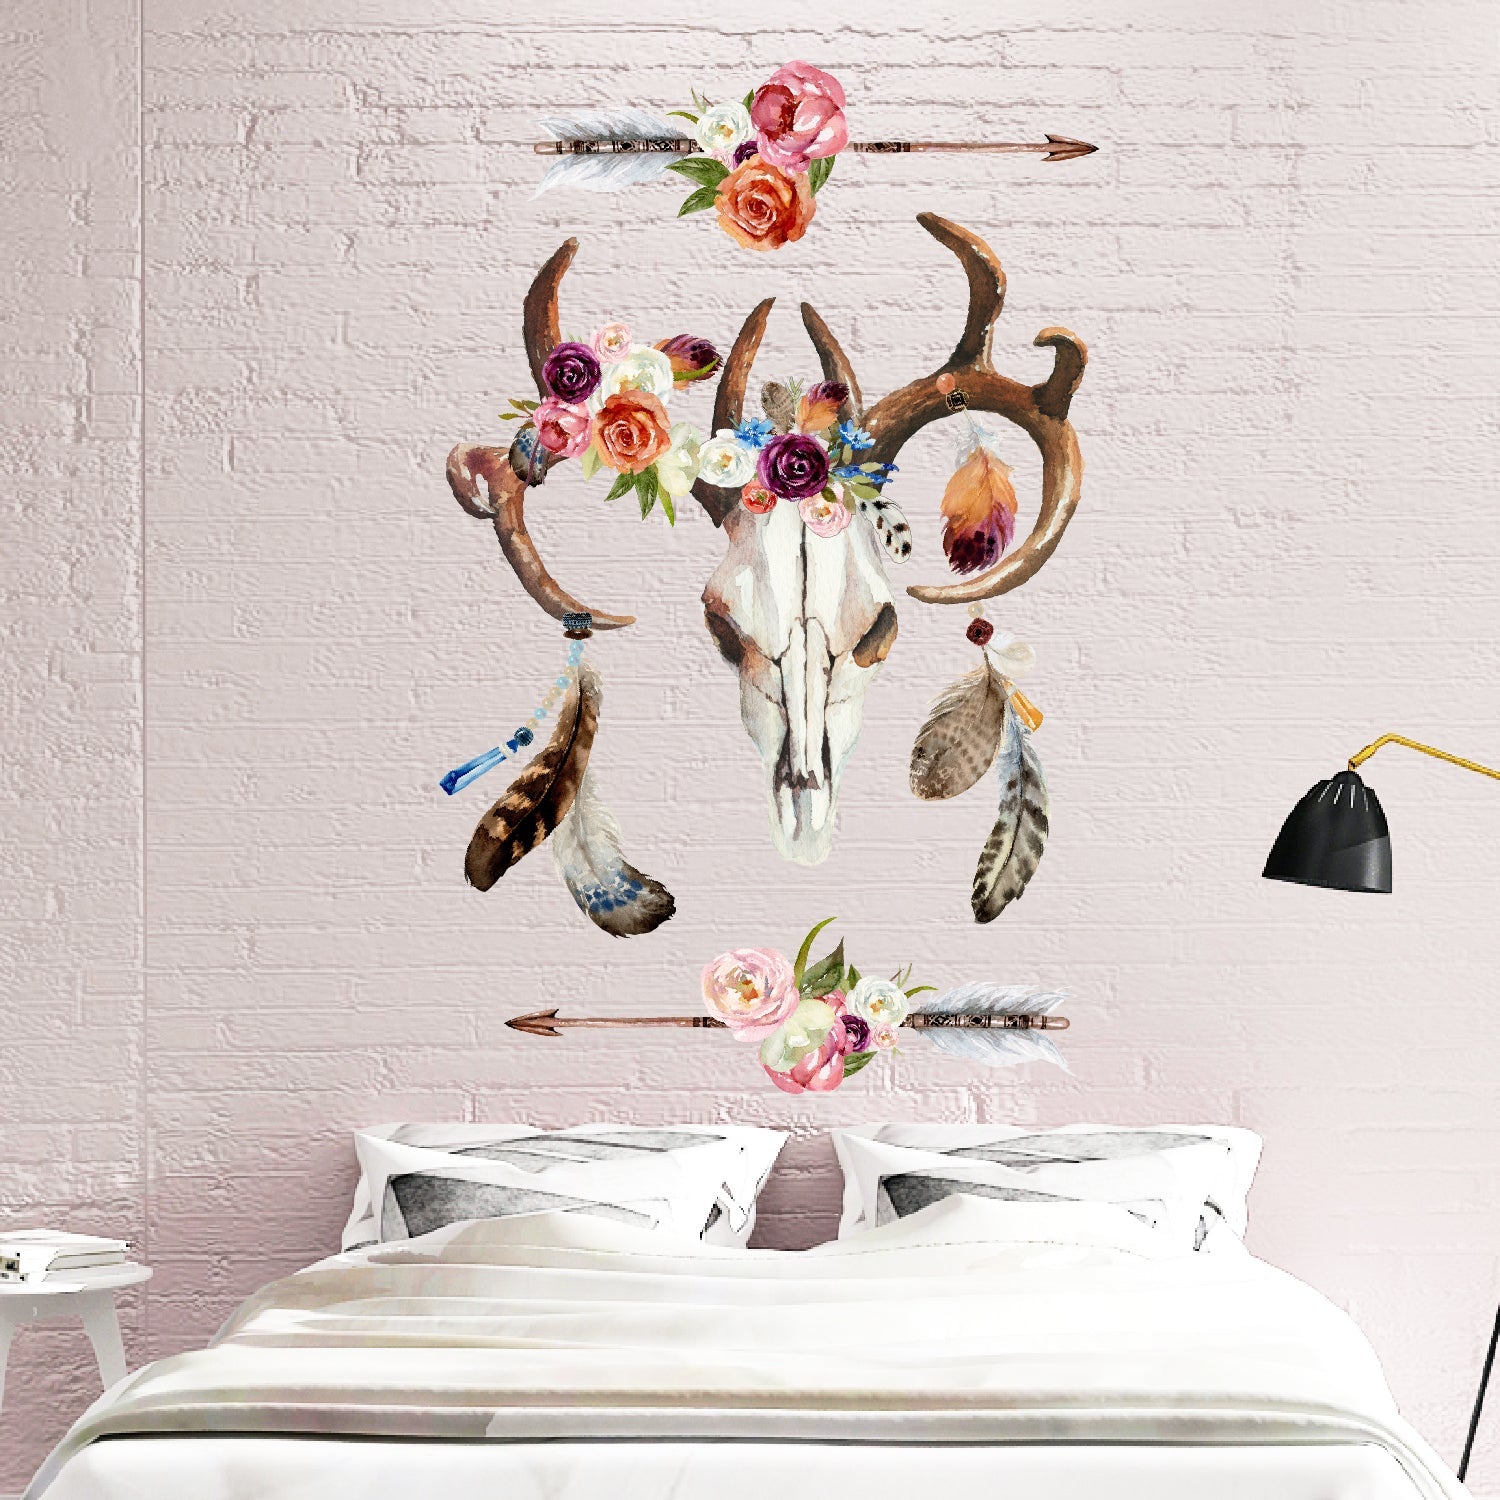 Boho Skull Feathers and Flowers Fabric Wall Decals - Picture Perfect Decals